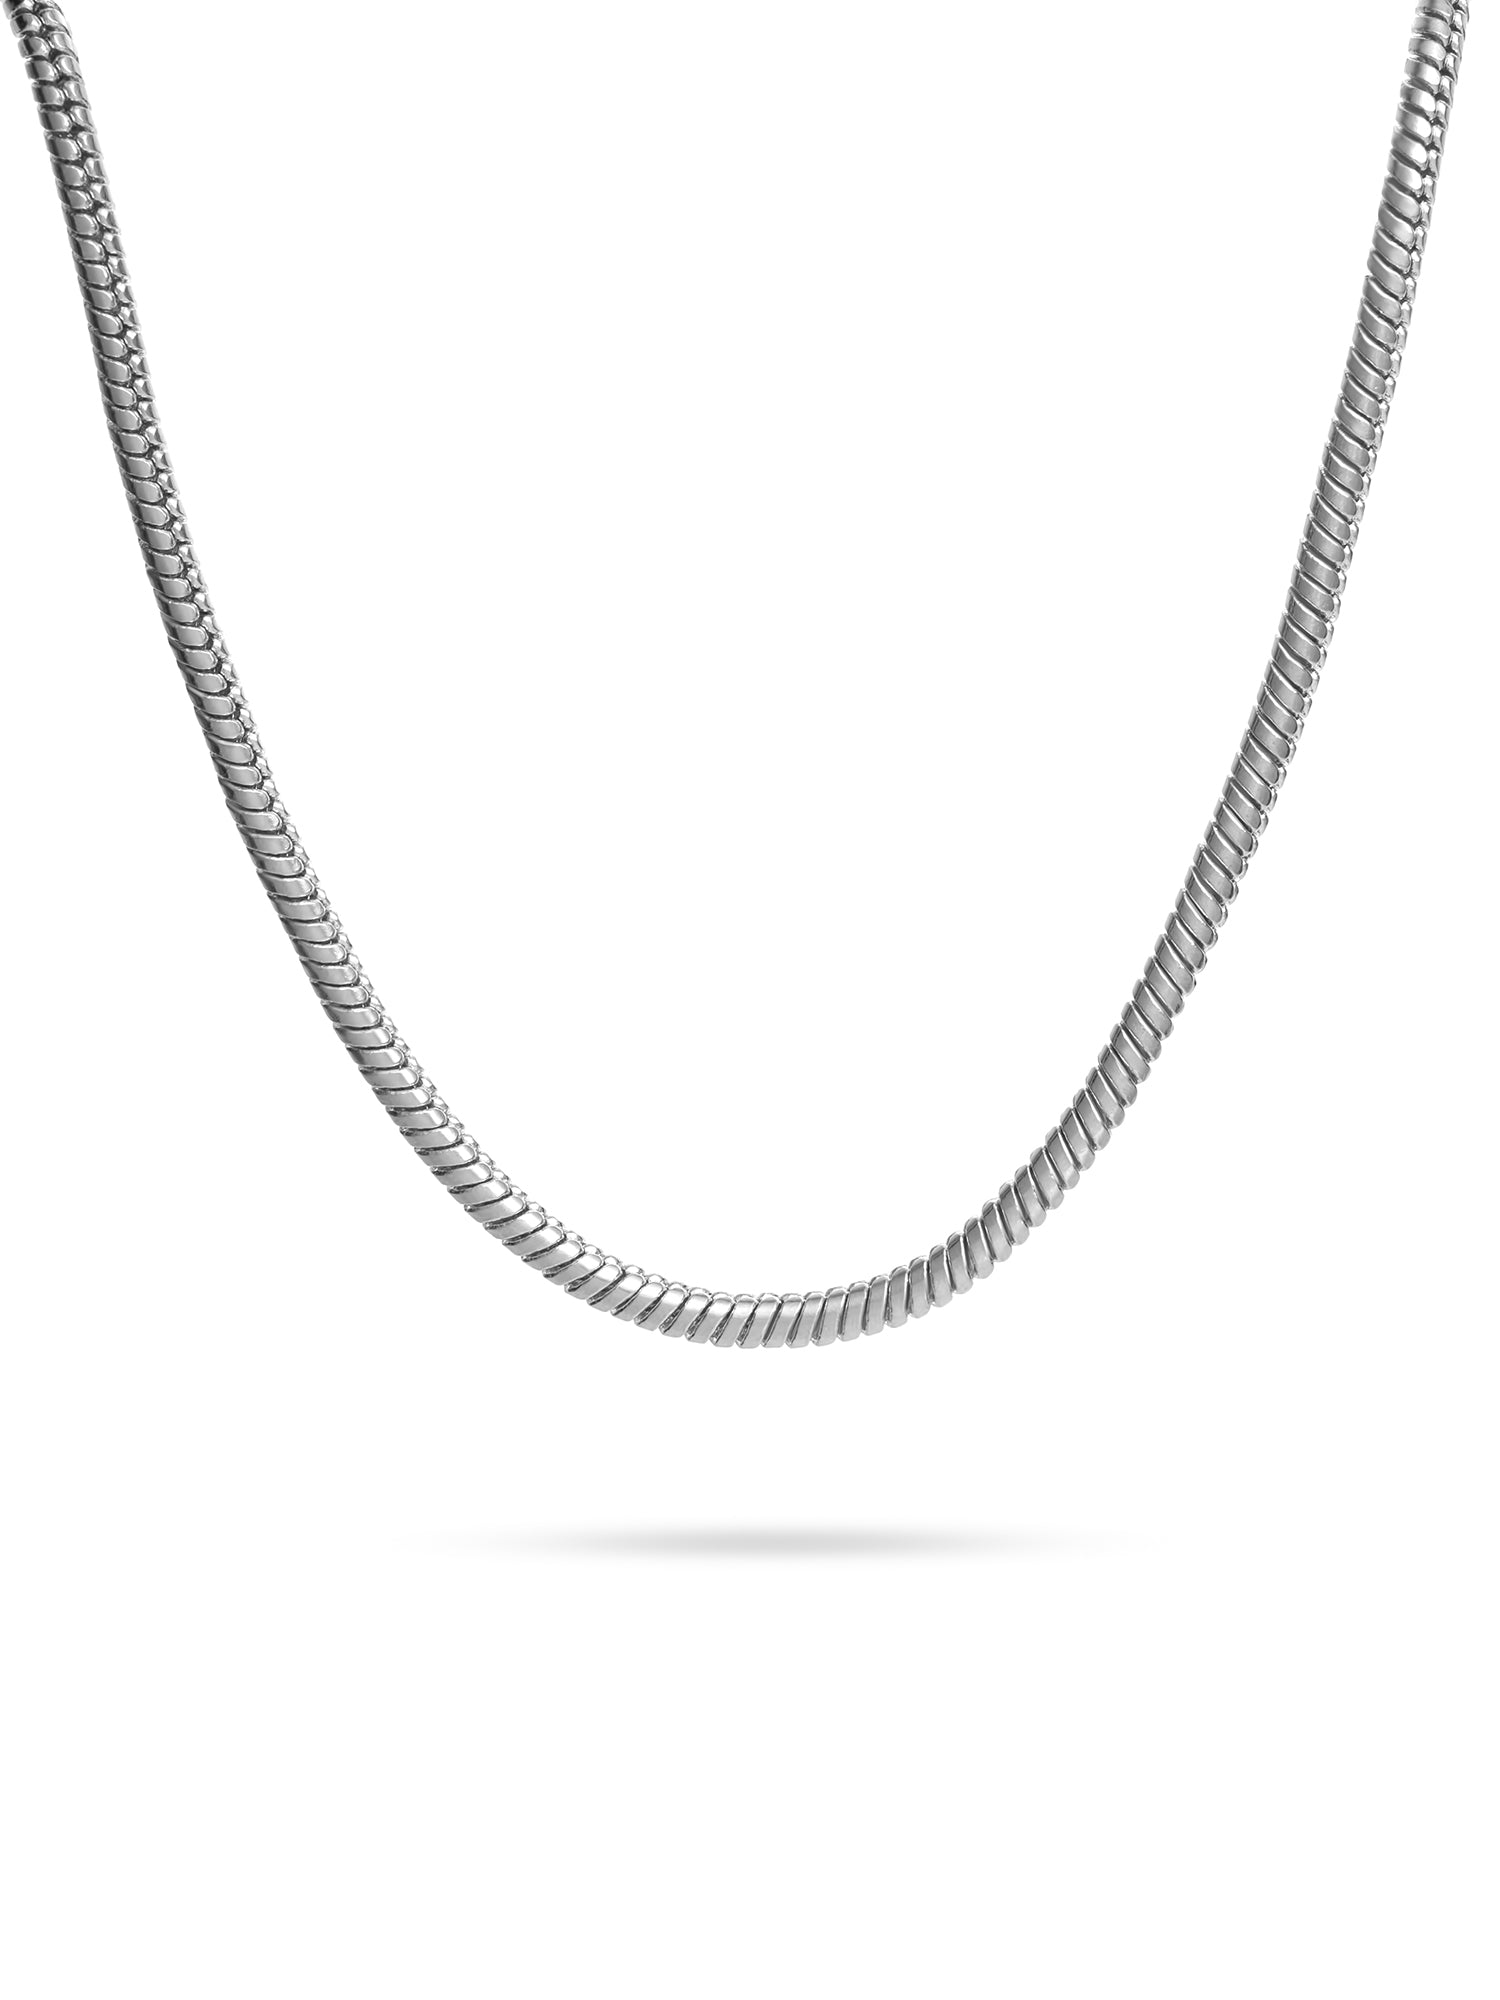 Round Snake Chain Necklace, White Gold 16"